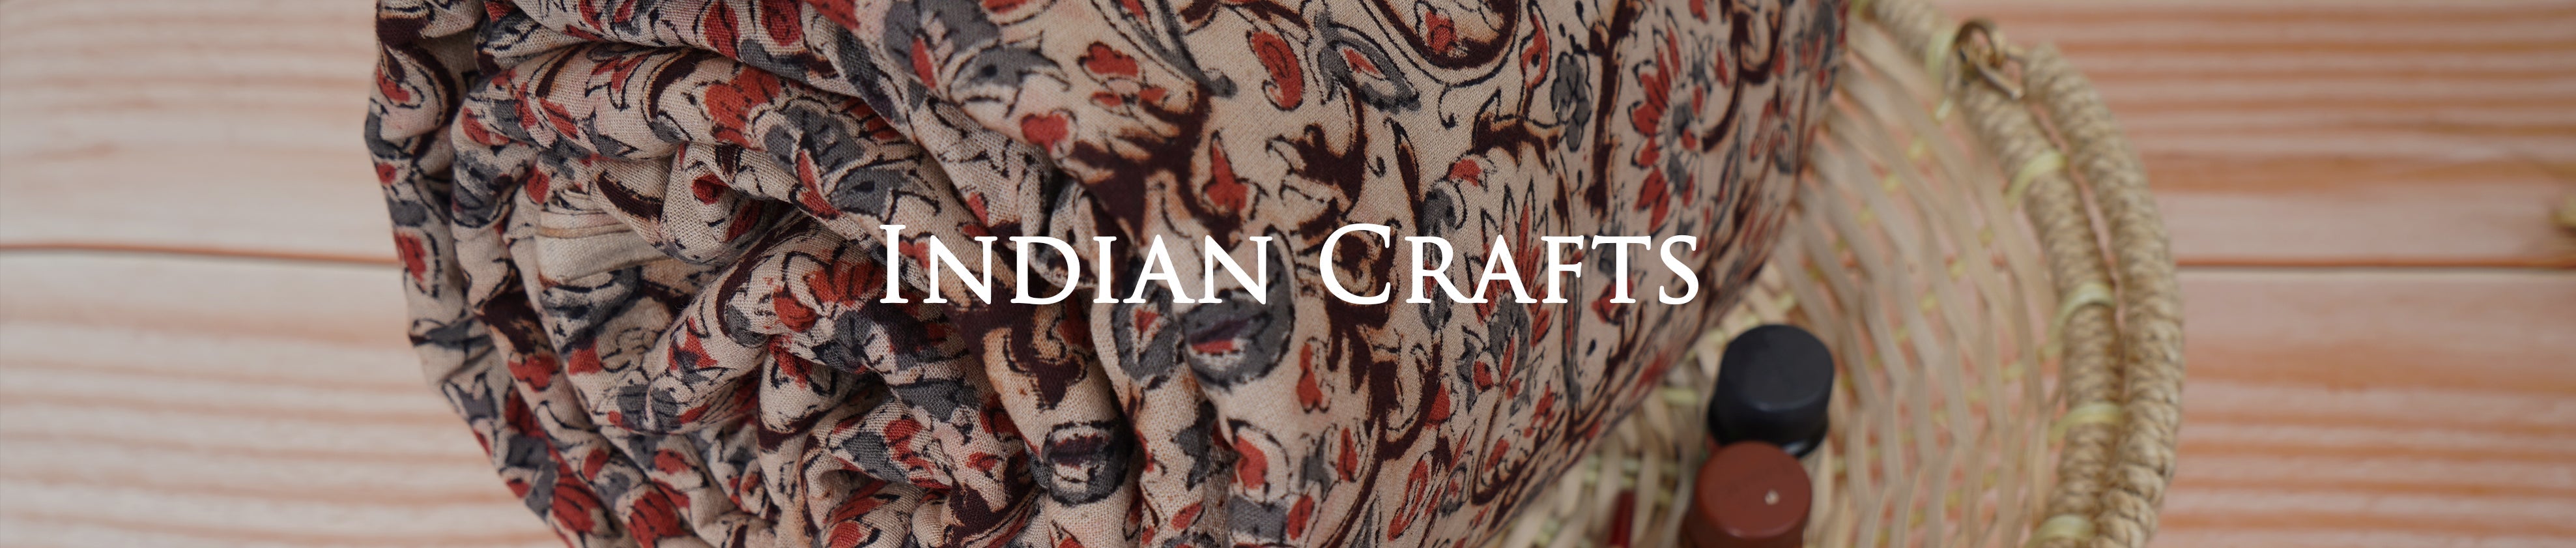 Indian crafts fabric